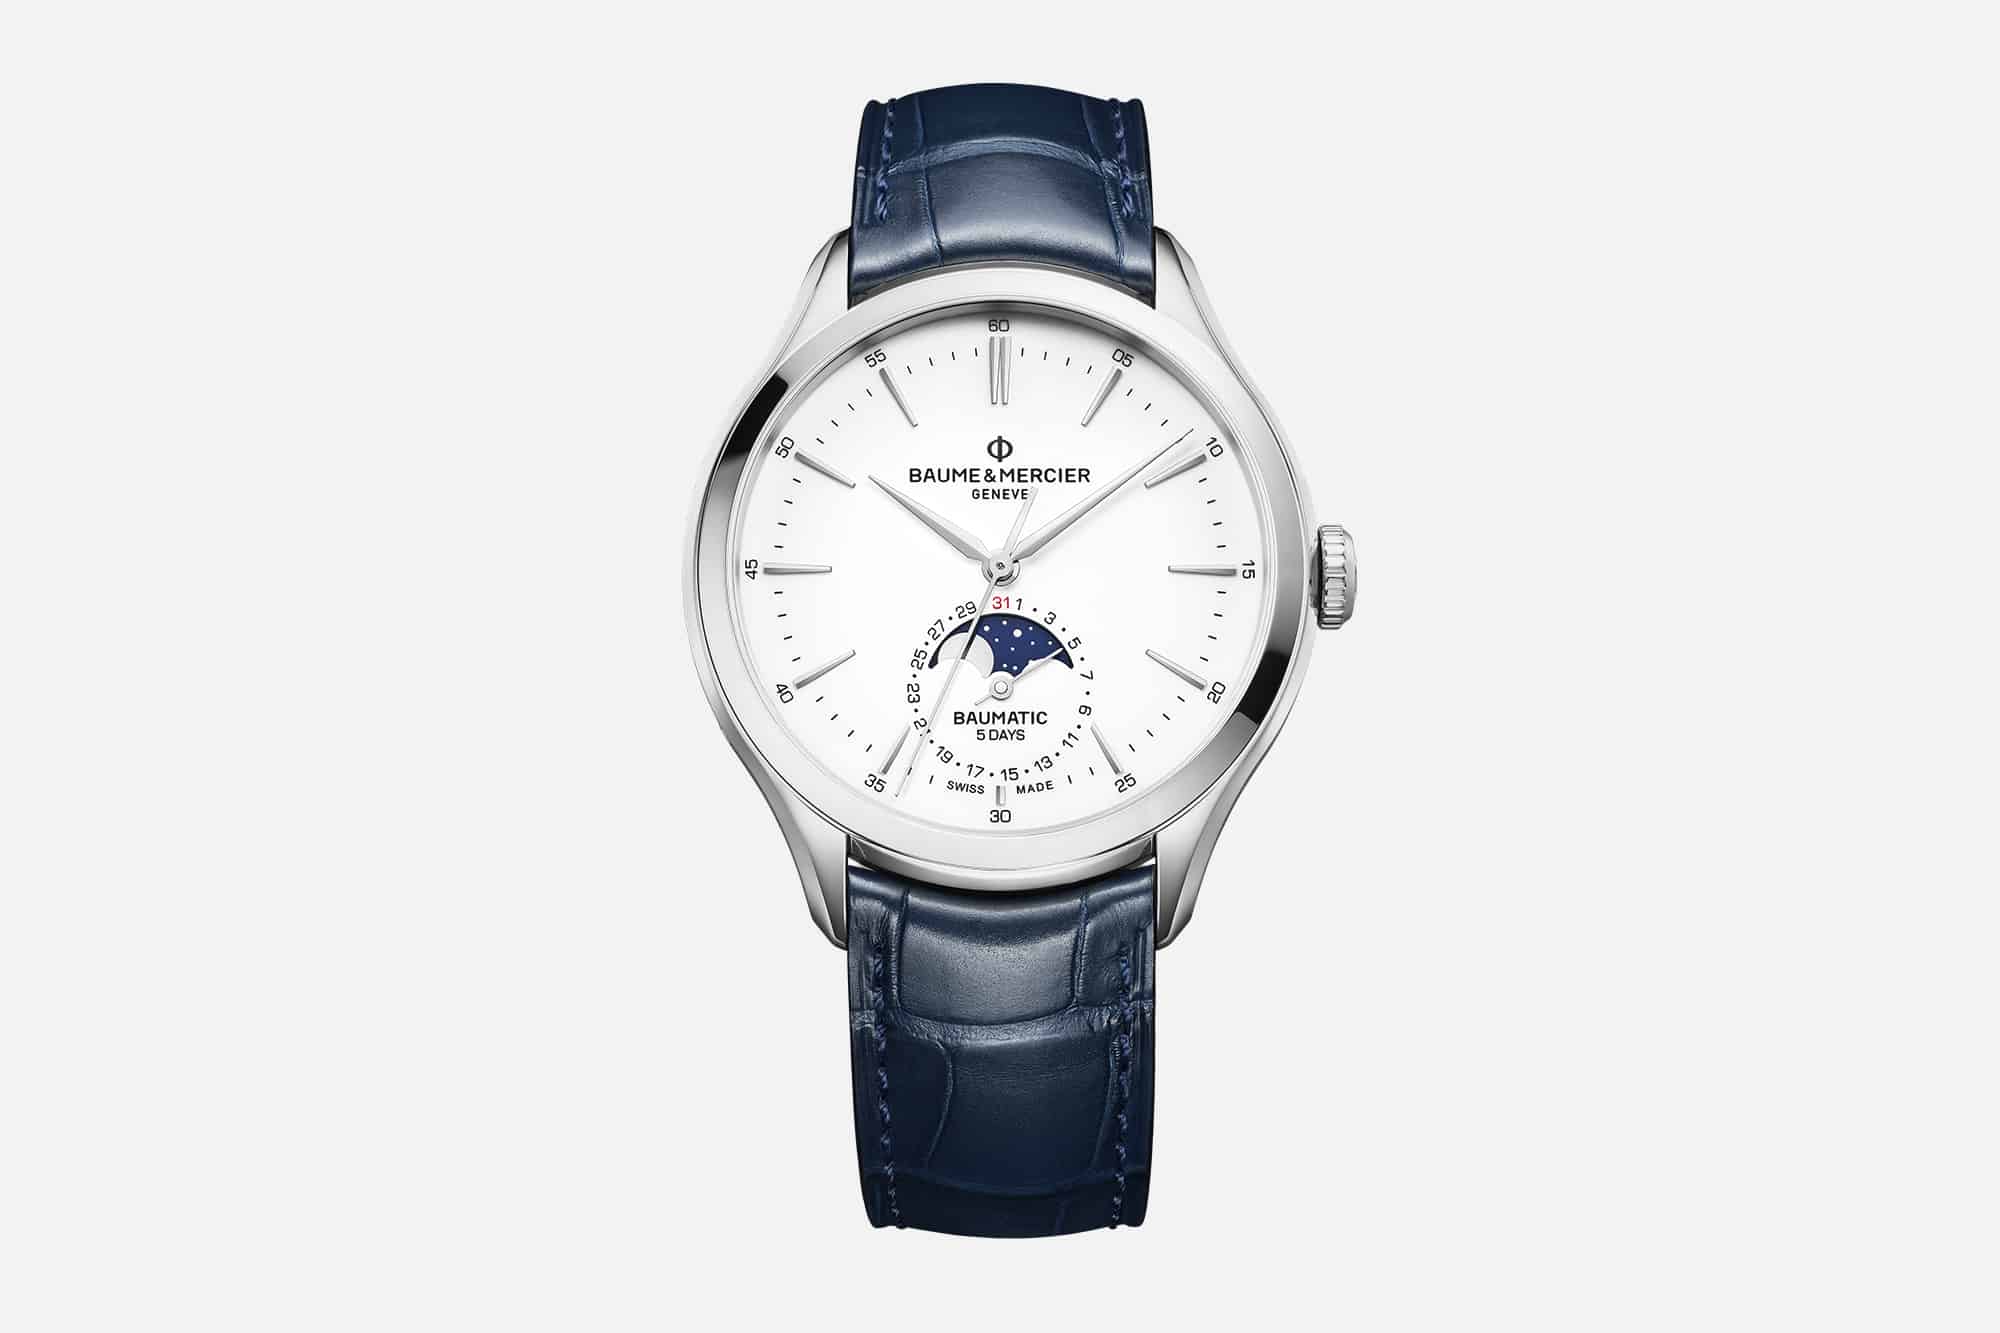 Baume & Mercier Add a Moonphase Complication to the Clifton Collection